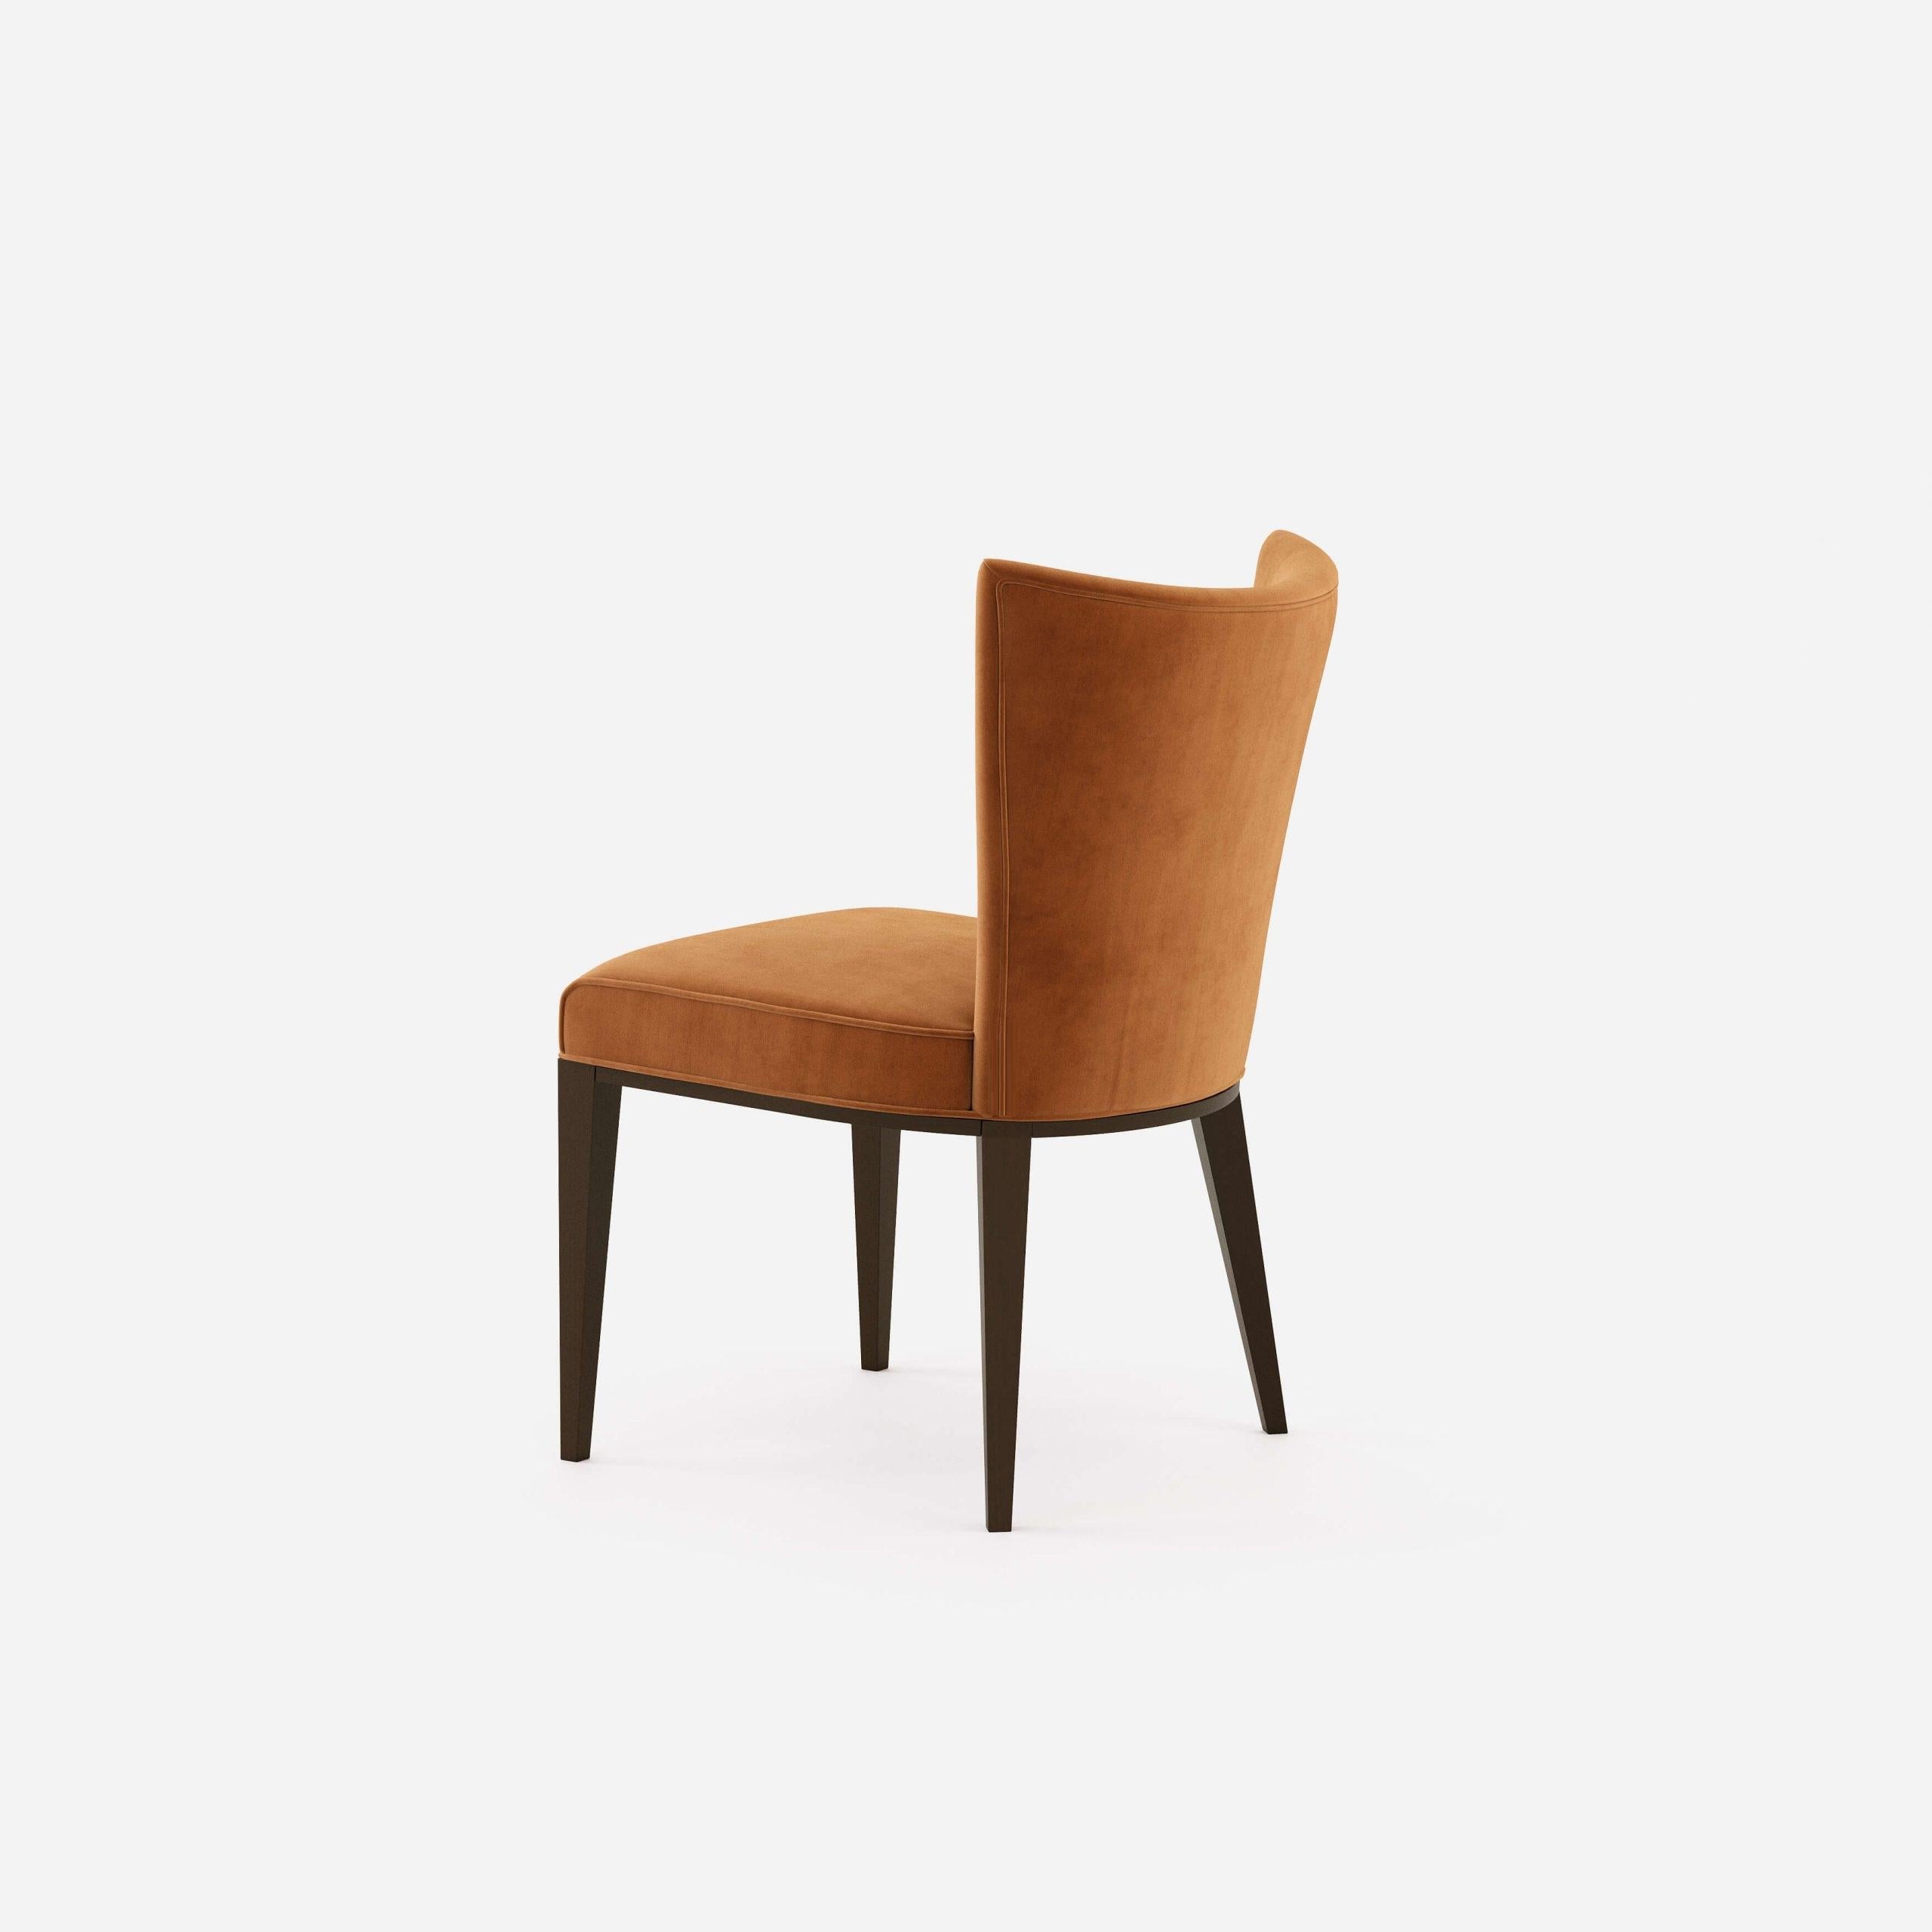 Fabric Set of 8 Contemporary Dining Chairs Upholstered in Brick Velvet